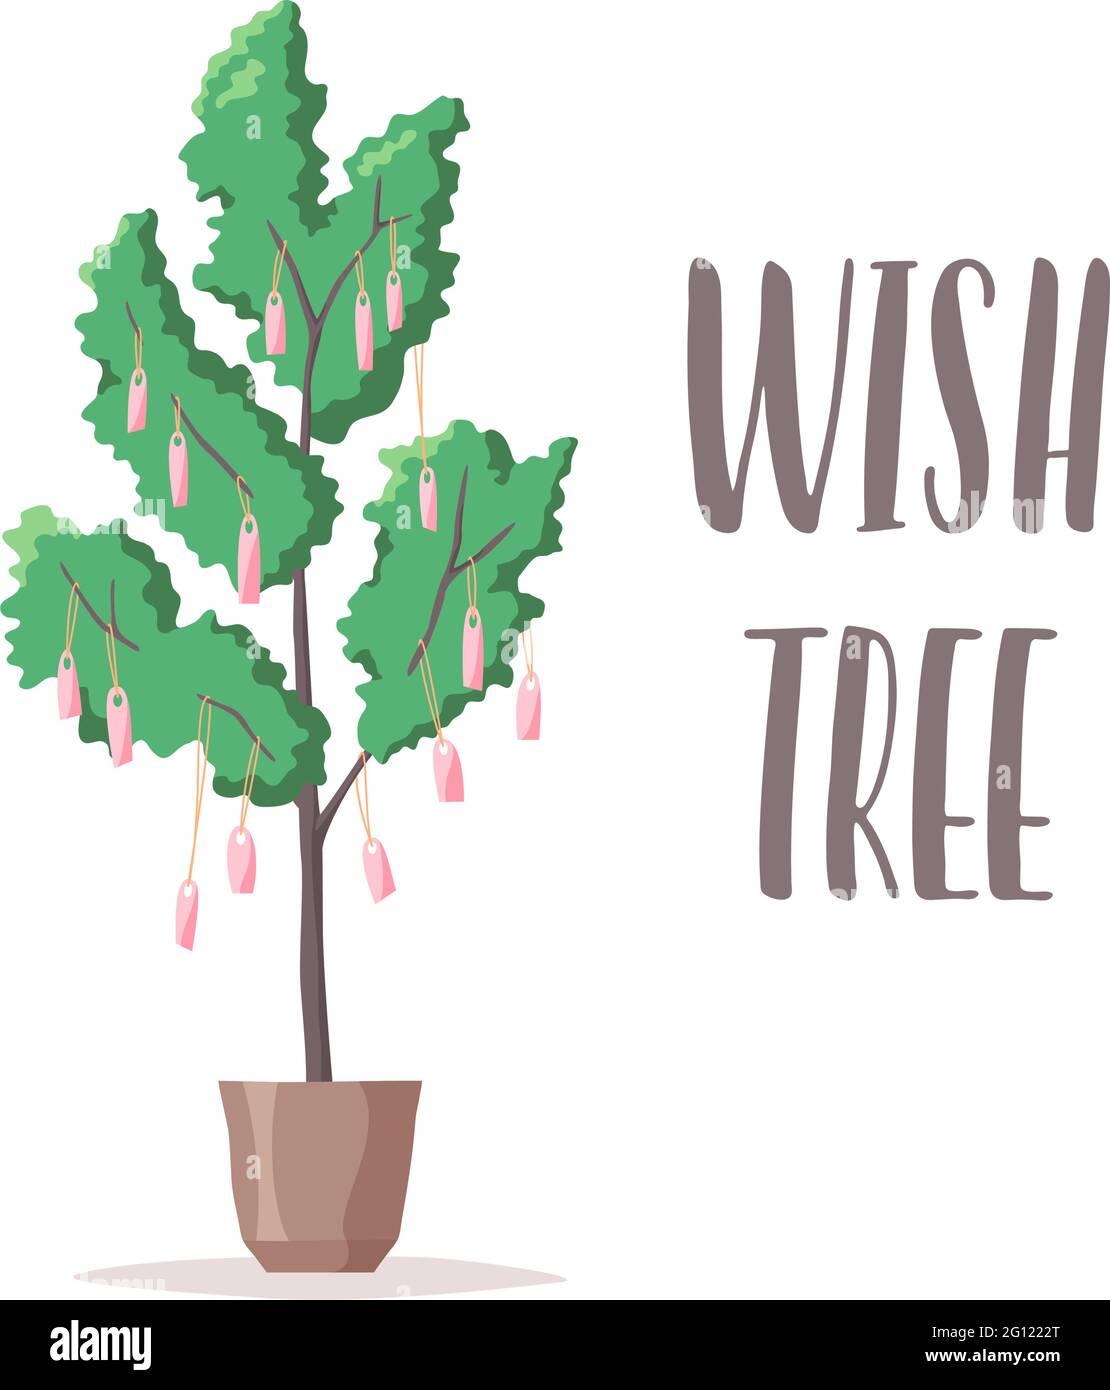 Wish tree illustration and lettering, notes and labels with wishes hang on tree, written desires and dreams, plant in pot, vector Stock Vector